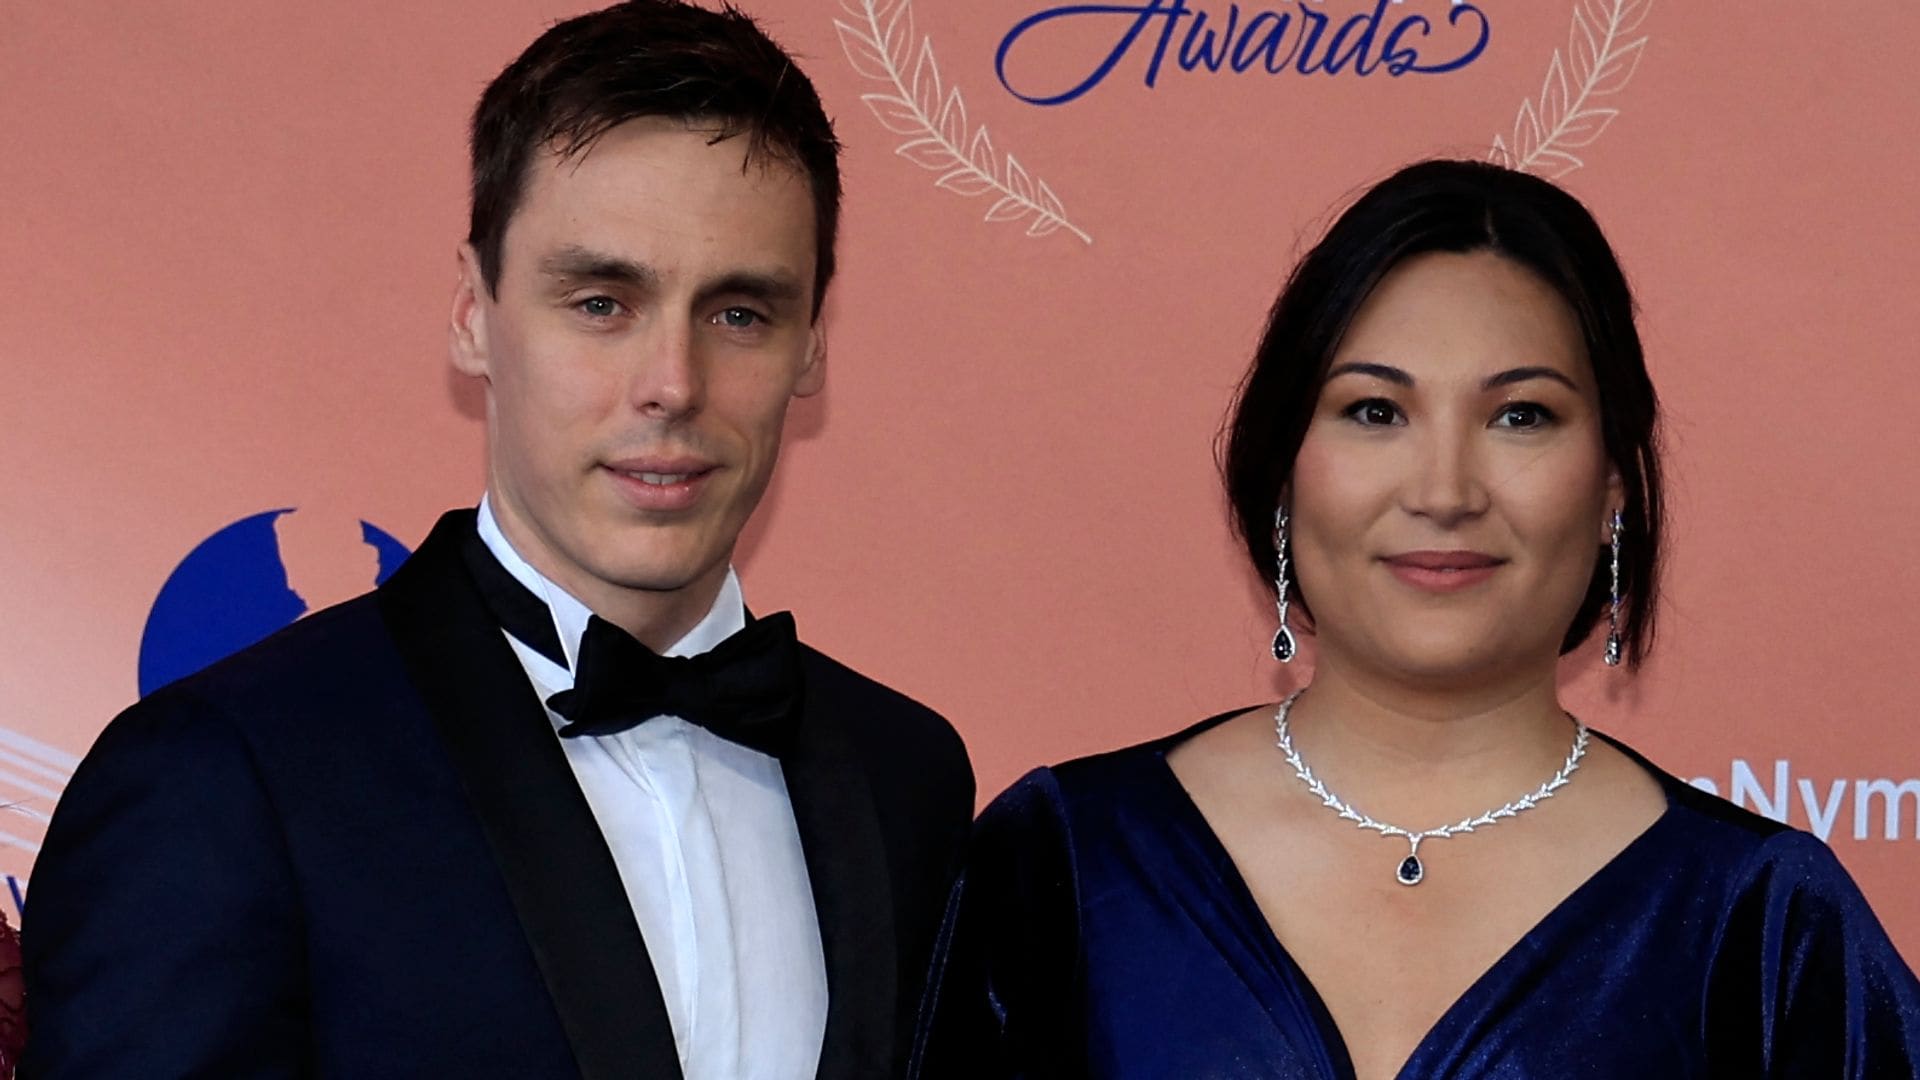 Louis Ducruet and his wife Marie expecting second daughter